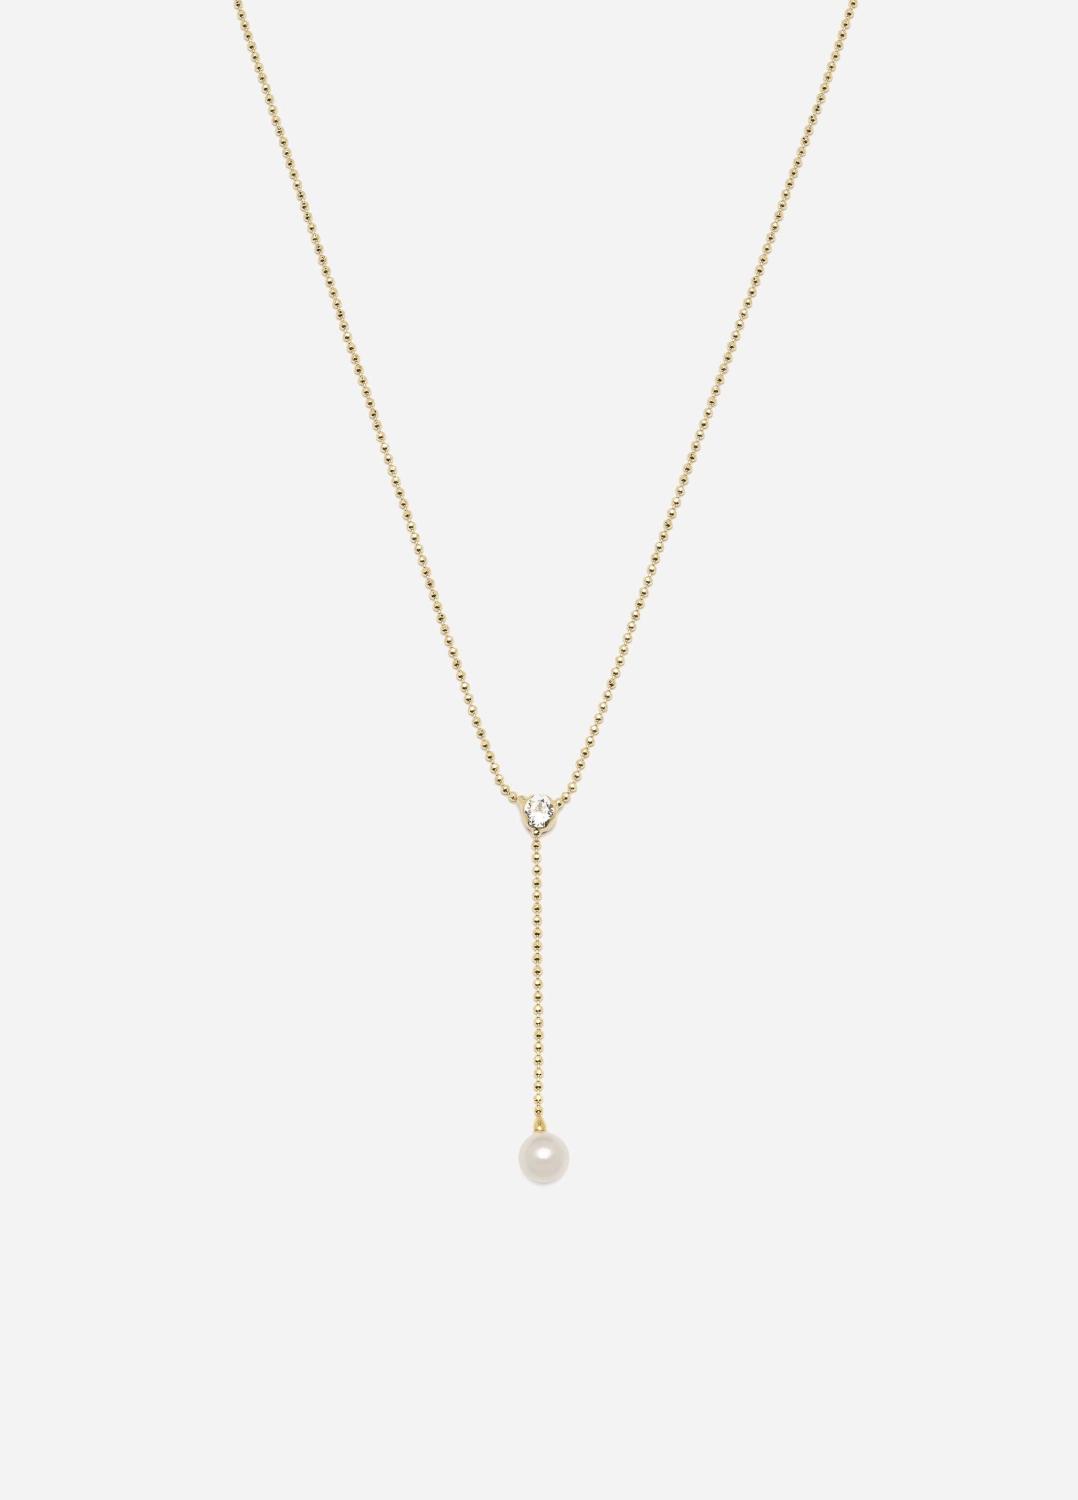 Lovey Necklace, Women, Gold